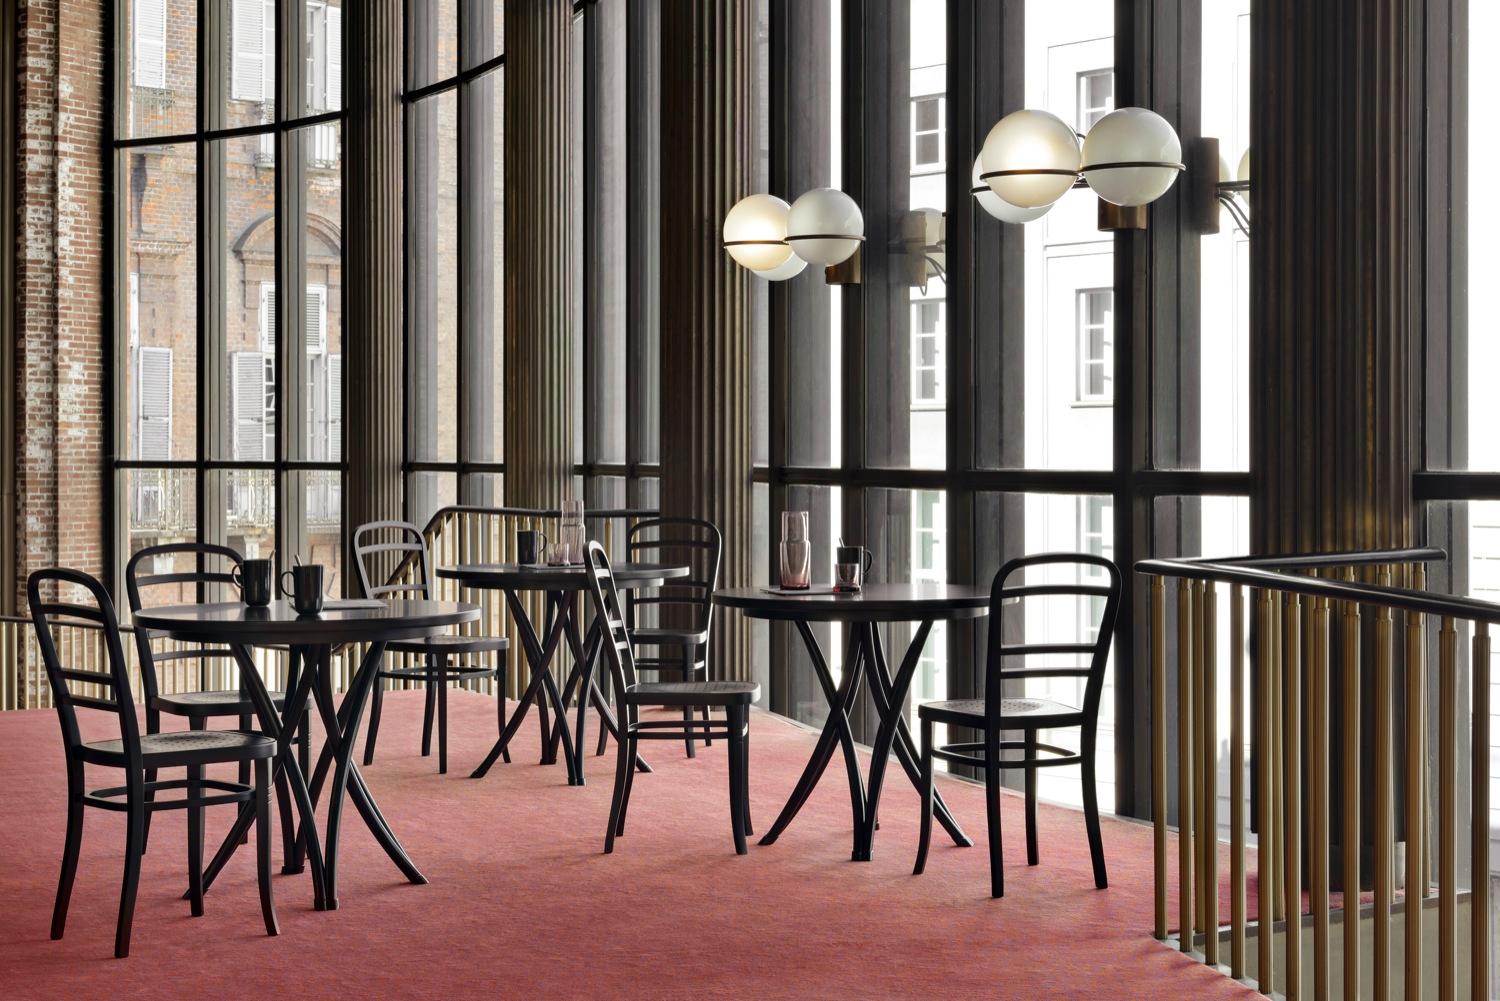 A criss-cross design. The essential shape and volumes provide the distinctive trait of the Austrian manufacturer, giving Rehbeintisch an extremely contemporary look. A feeling of solidity, yet at the same time, of lightness. The structure has been